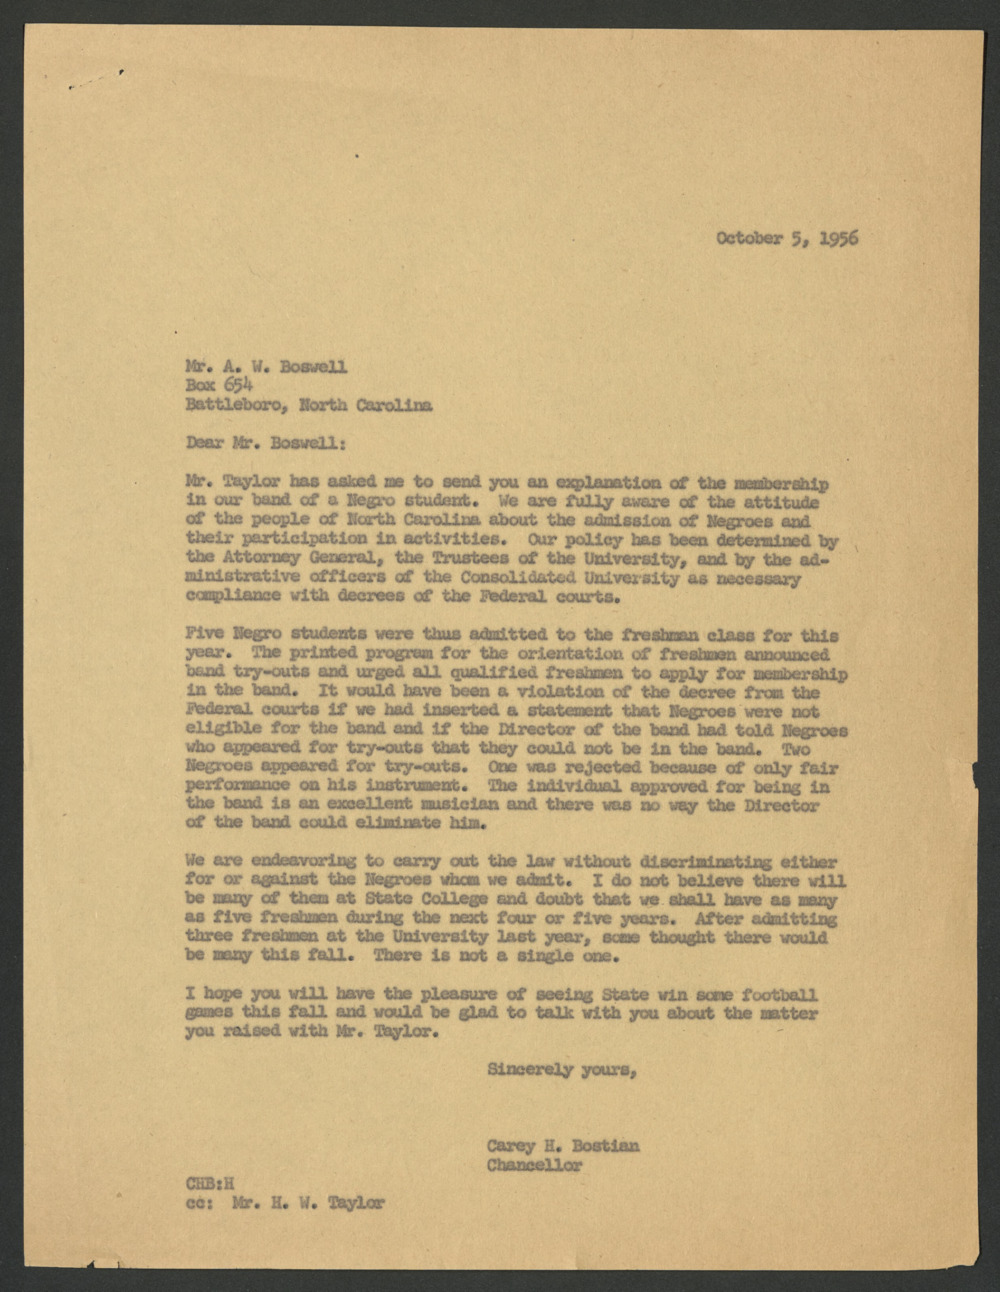 A scan of a typed letter from Chancellor Bostian to Mr. A.W. Boswell regarding Boswell's opposition to NC State University having an African American student in the band. (Oct. 5, 1956)